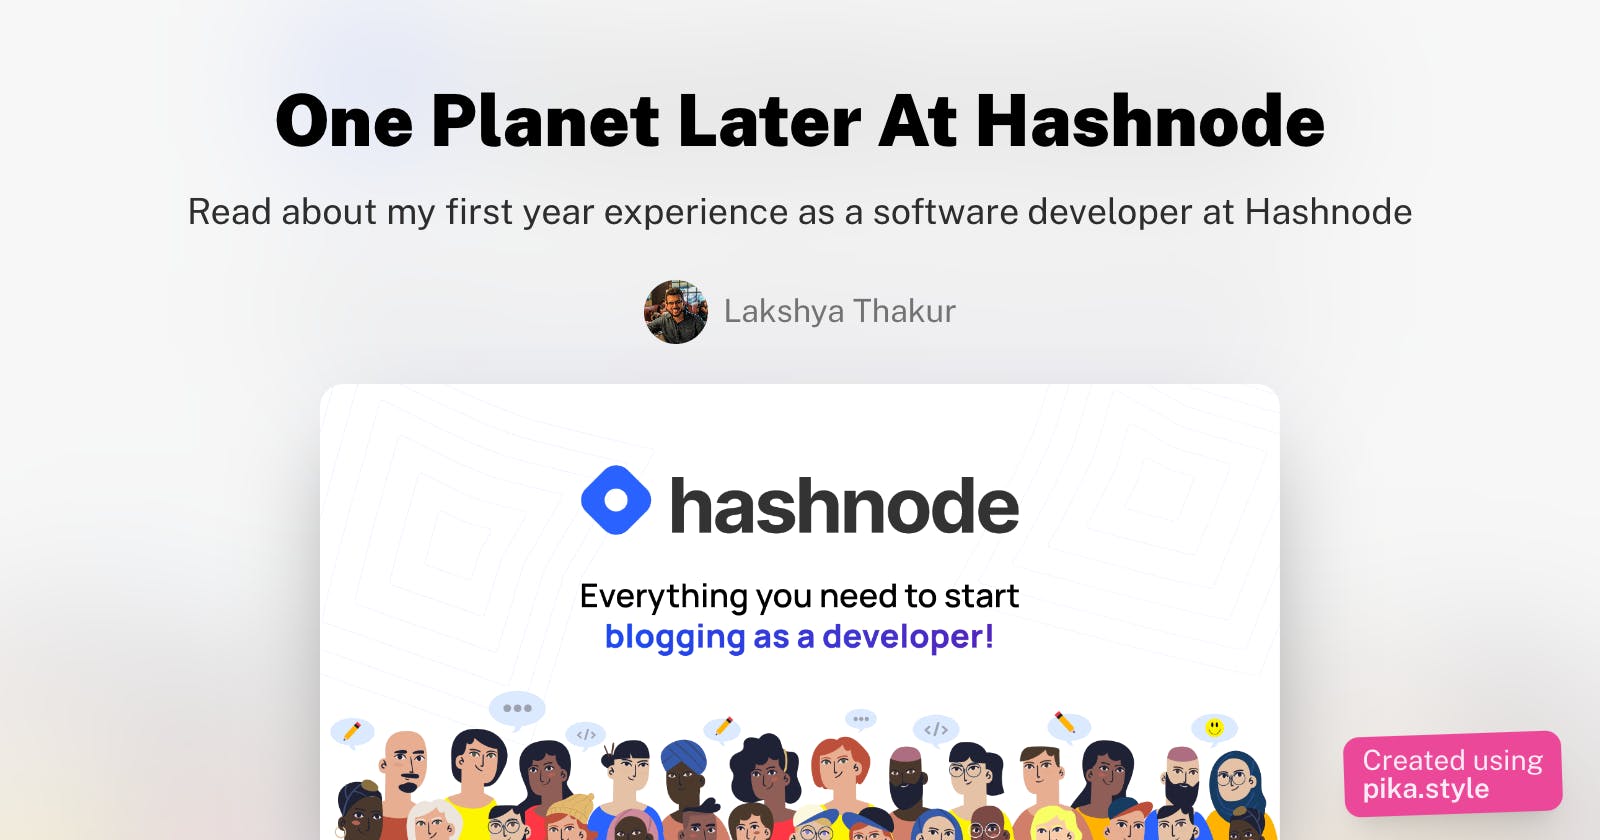 One Planet Later At Hashnode